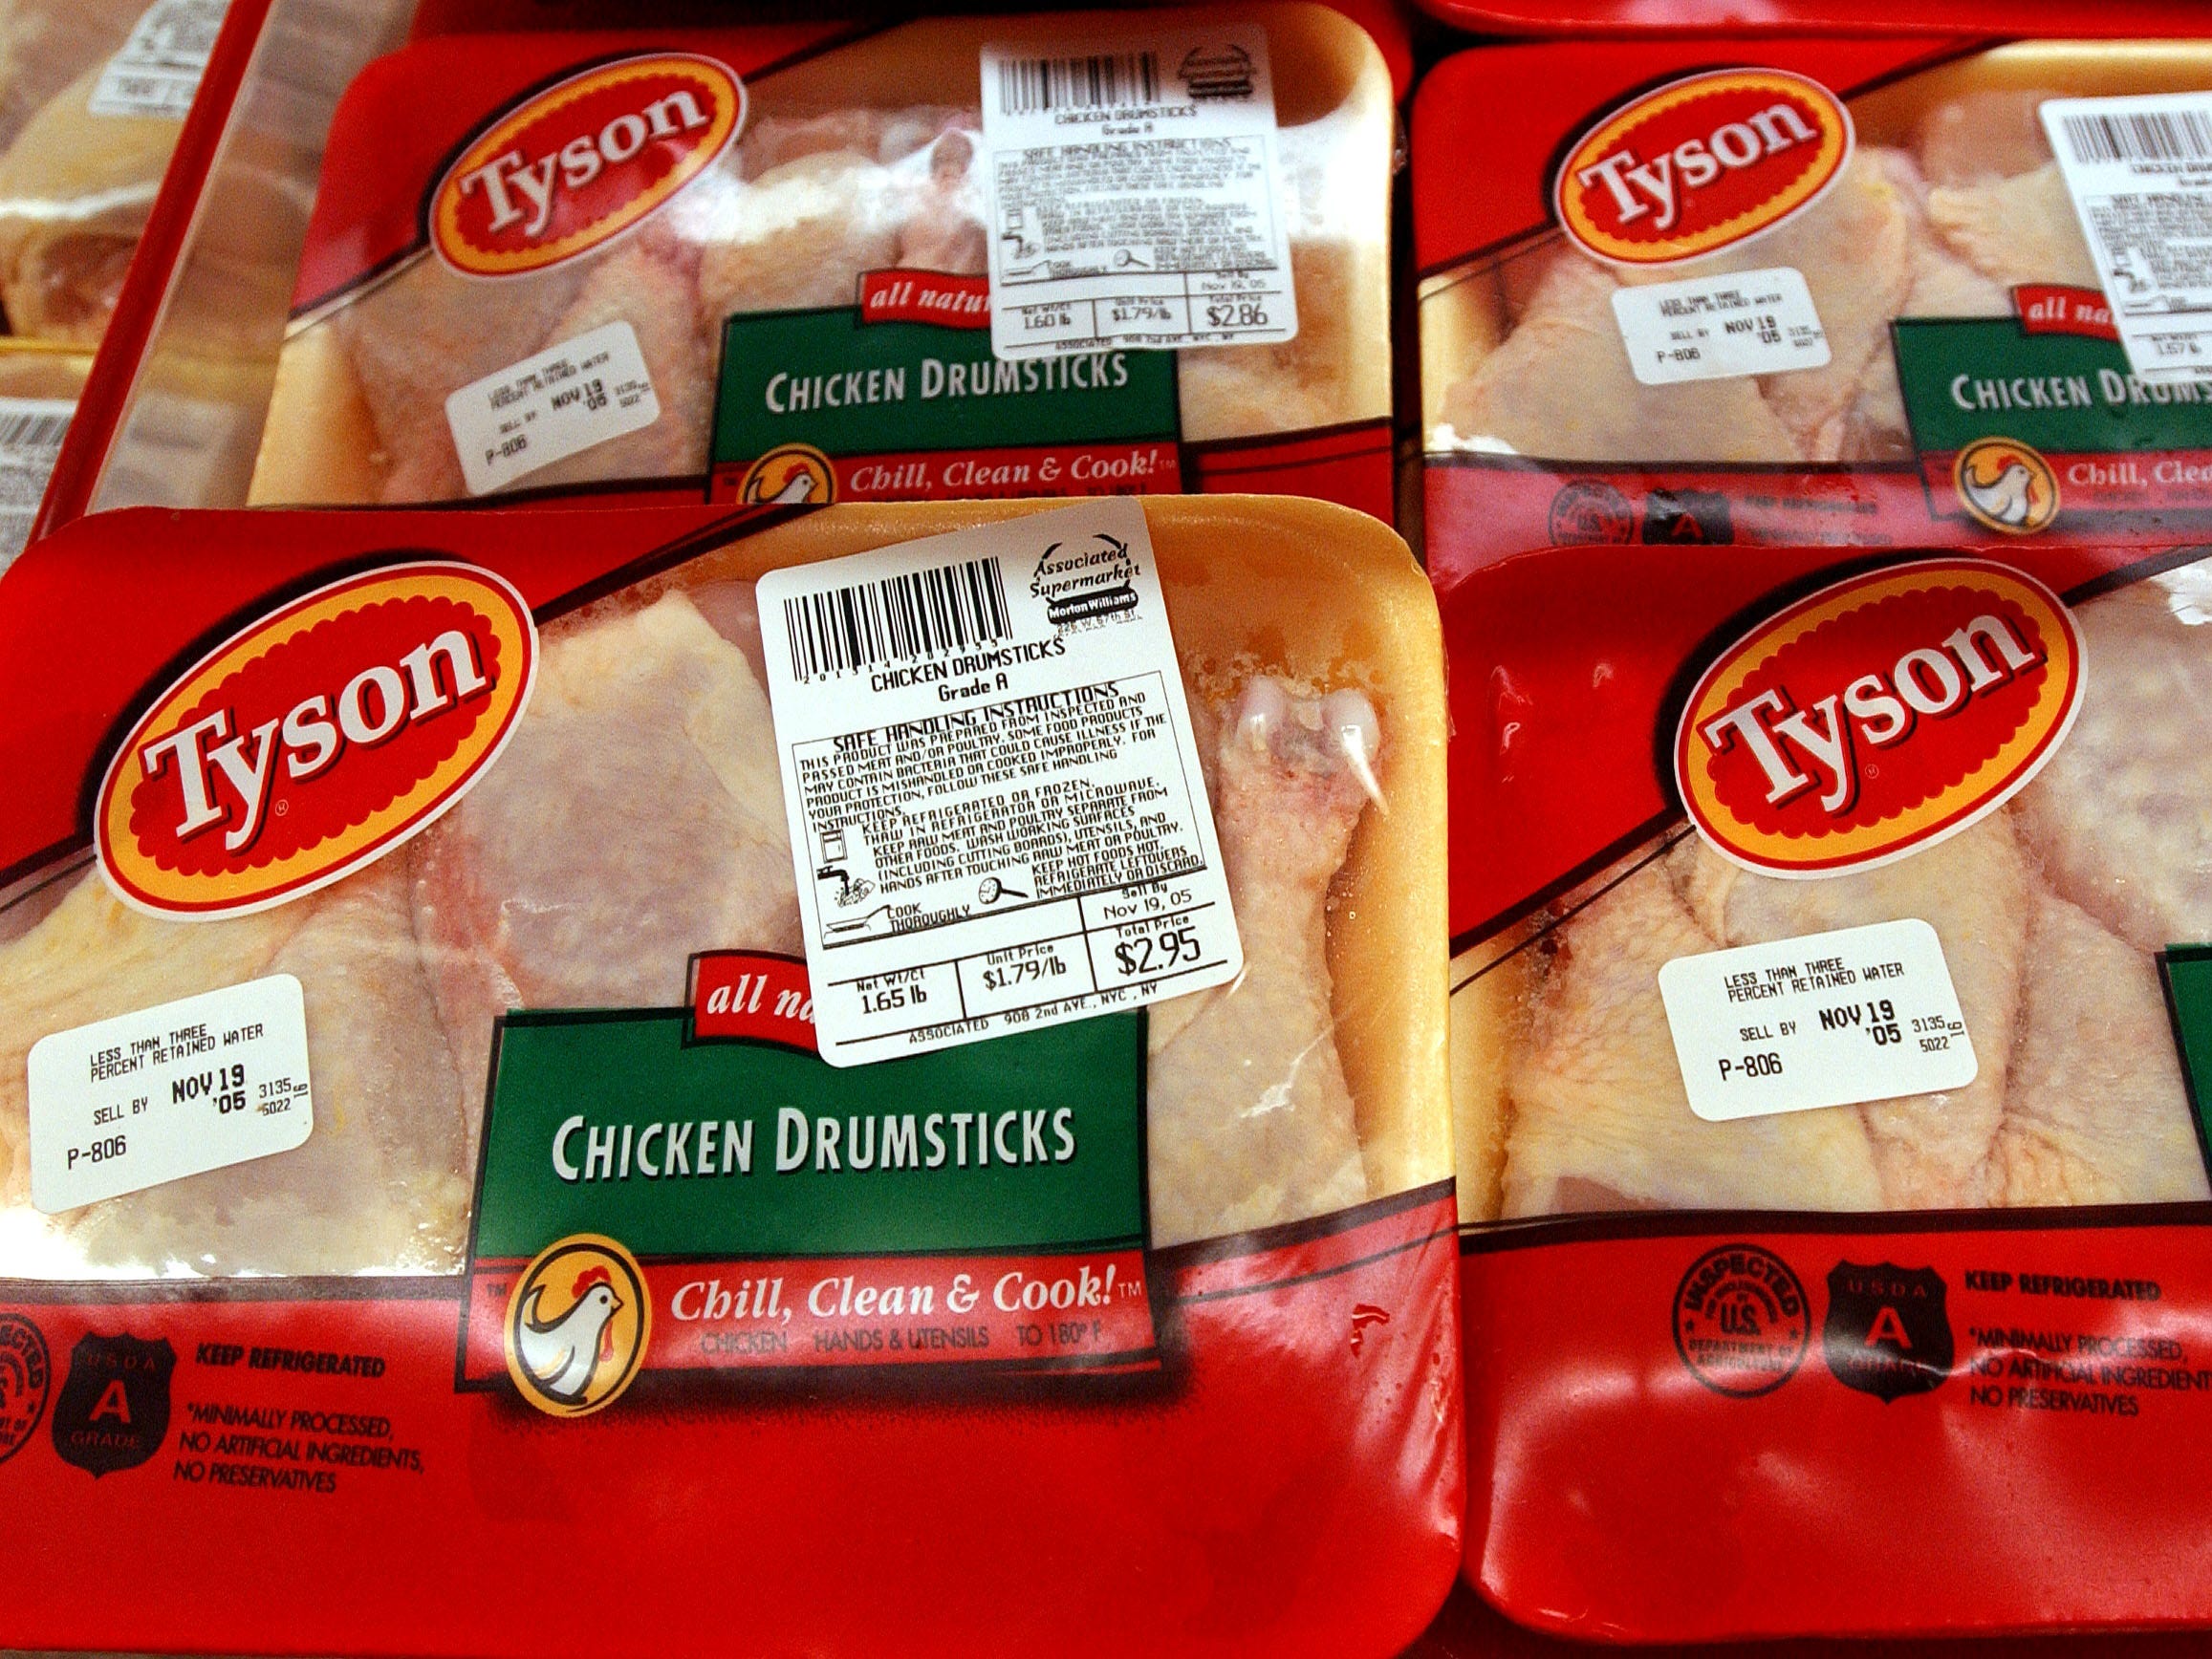 Packages of Tyson-brand chicken products are displayed in the refrigerator section of an Associated Supermarket.